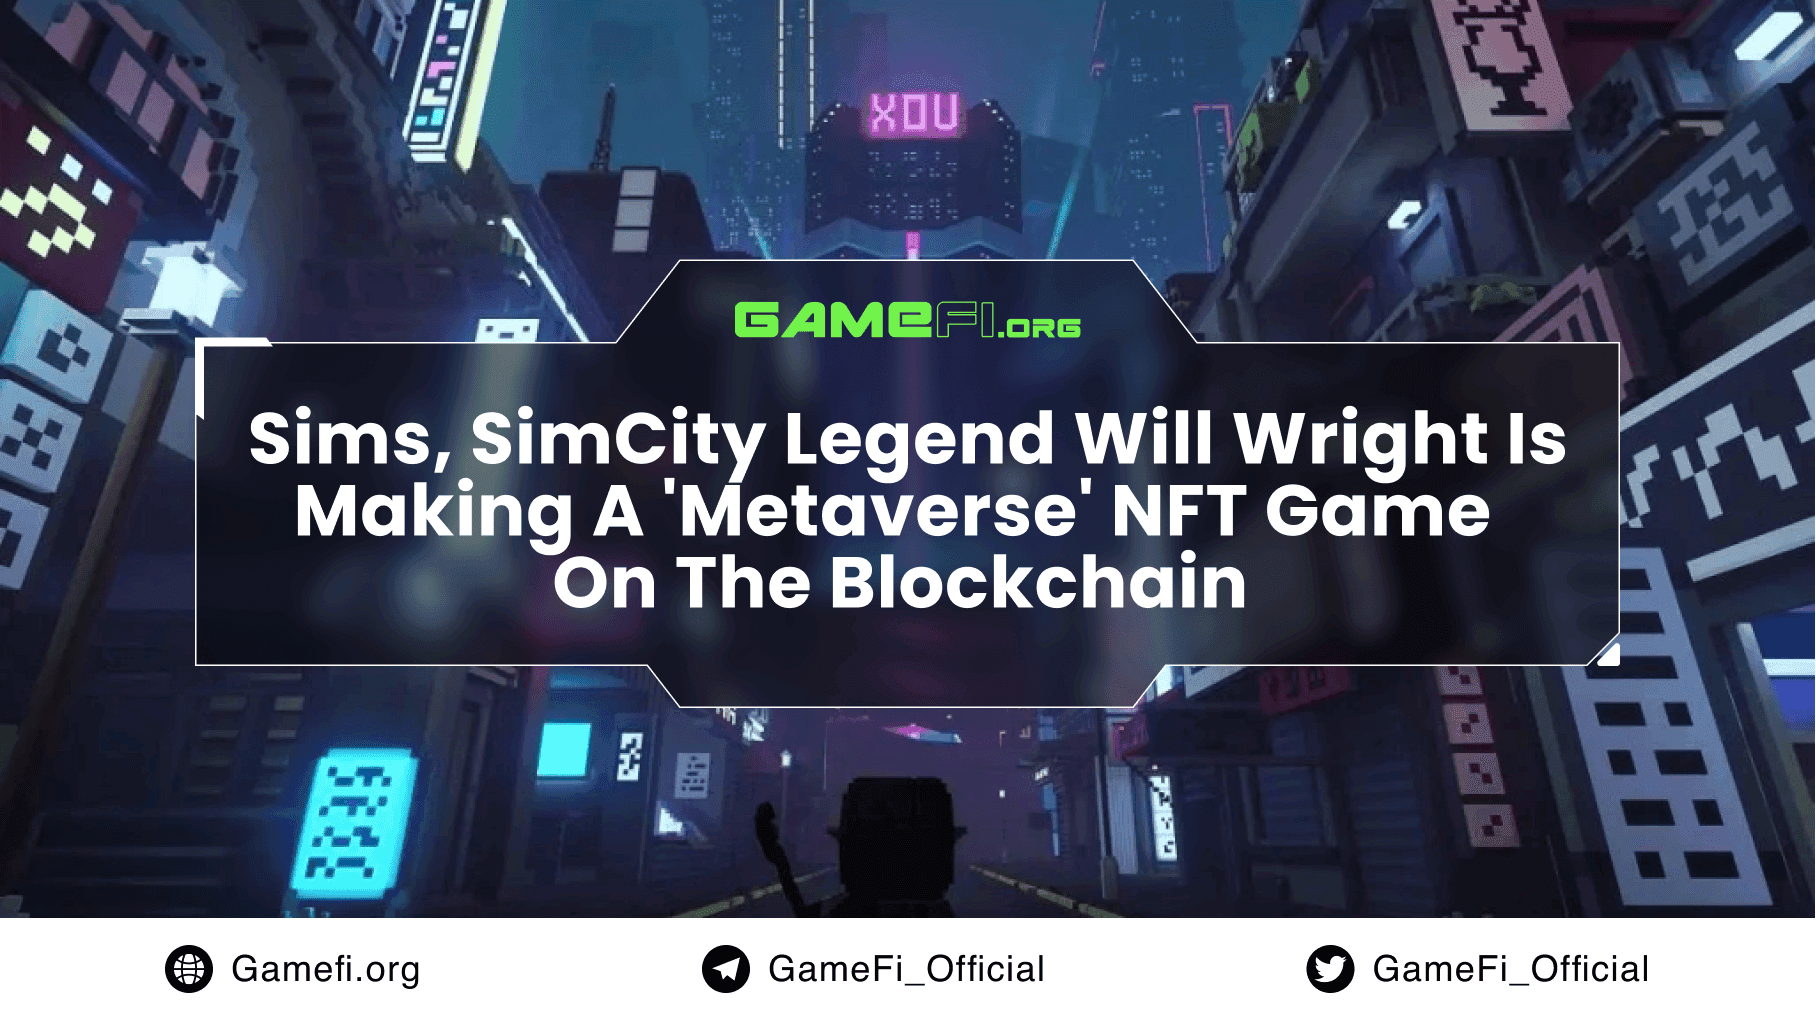 Sims, SimCity Legend Will Wright Is Making A 'Metaverse' NFT Game On The Blockchain